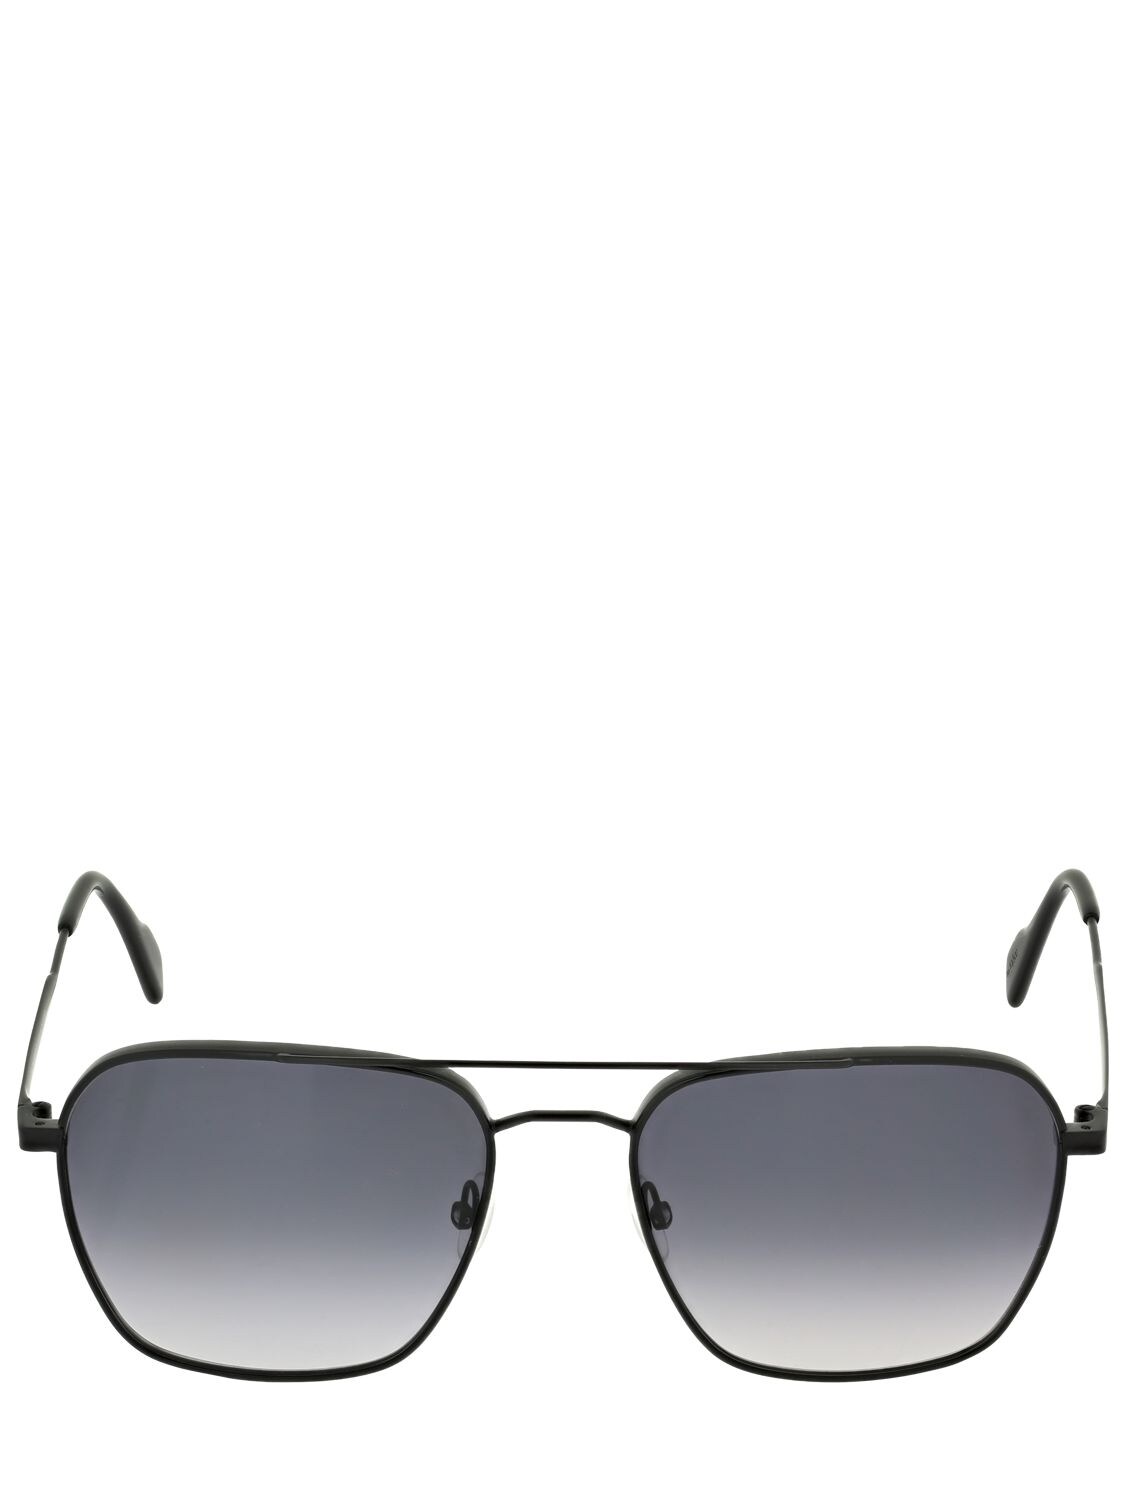 Andy Wolf Damian Squared Metal Sunglasses In Black,grey